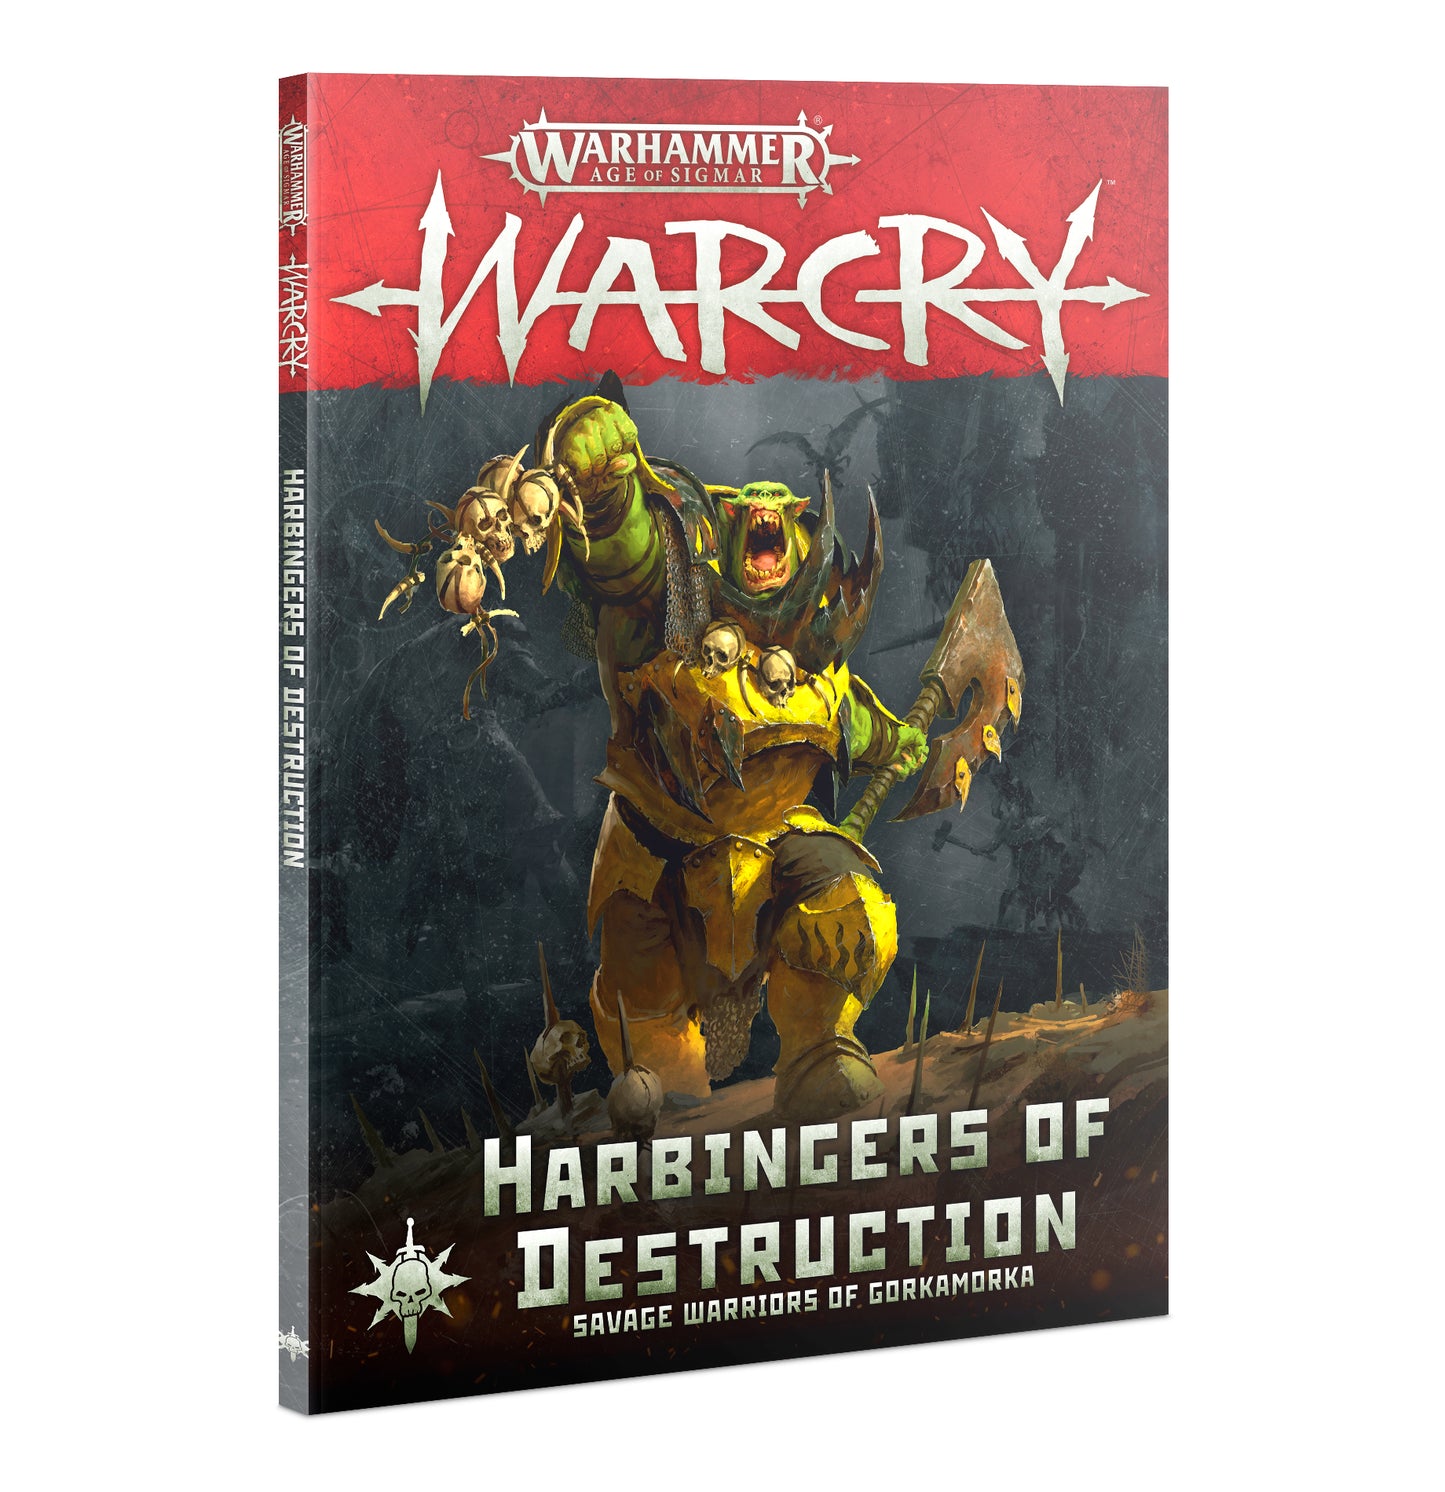 Age of Sigmar: Warcry Harbingers Of Destruction (English)